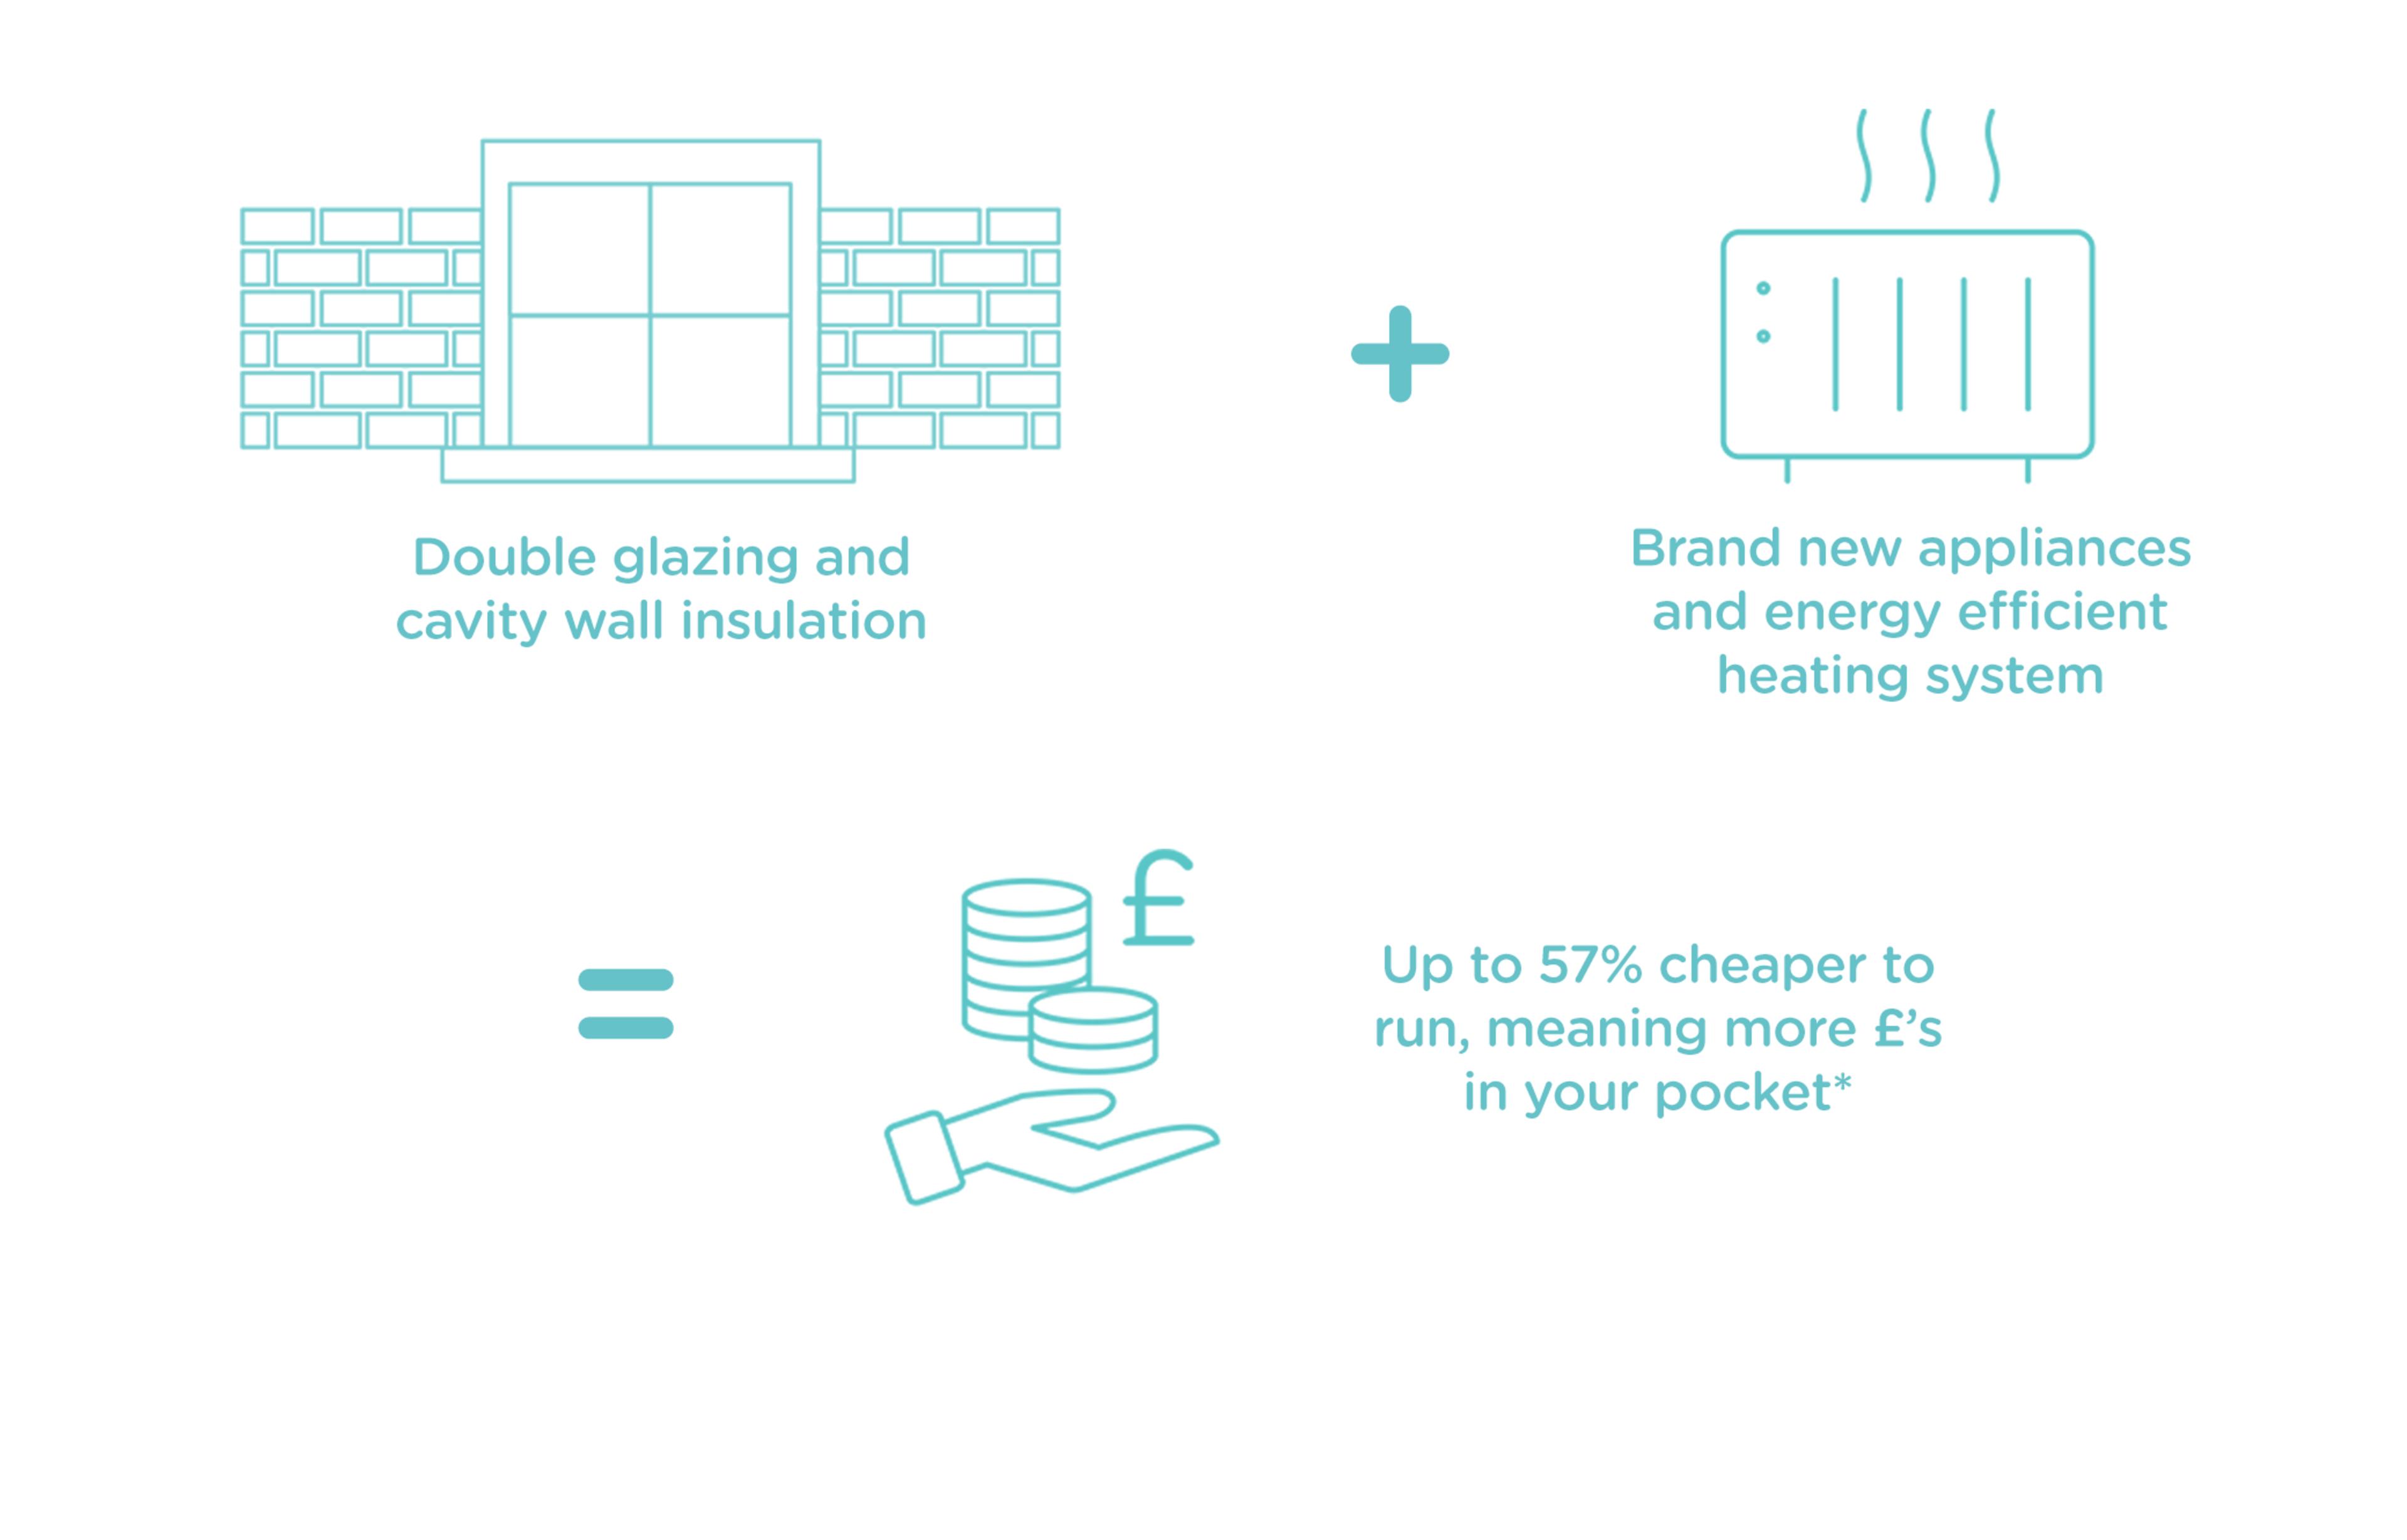 Infographic stating "double gazing and cavity wall insulation plus brand new appliances and energy efficient heating system equals up to 57% cheaper to run, meaning more pounds in your pocket"